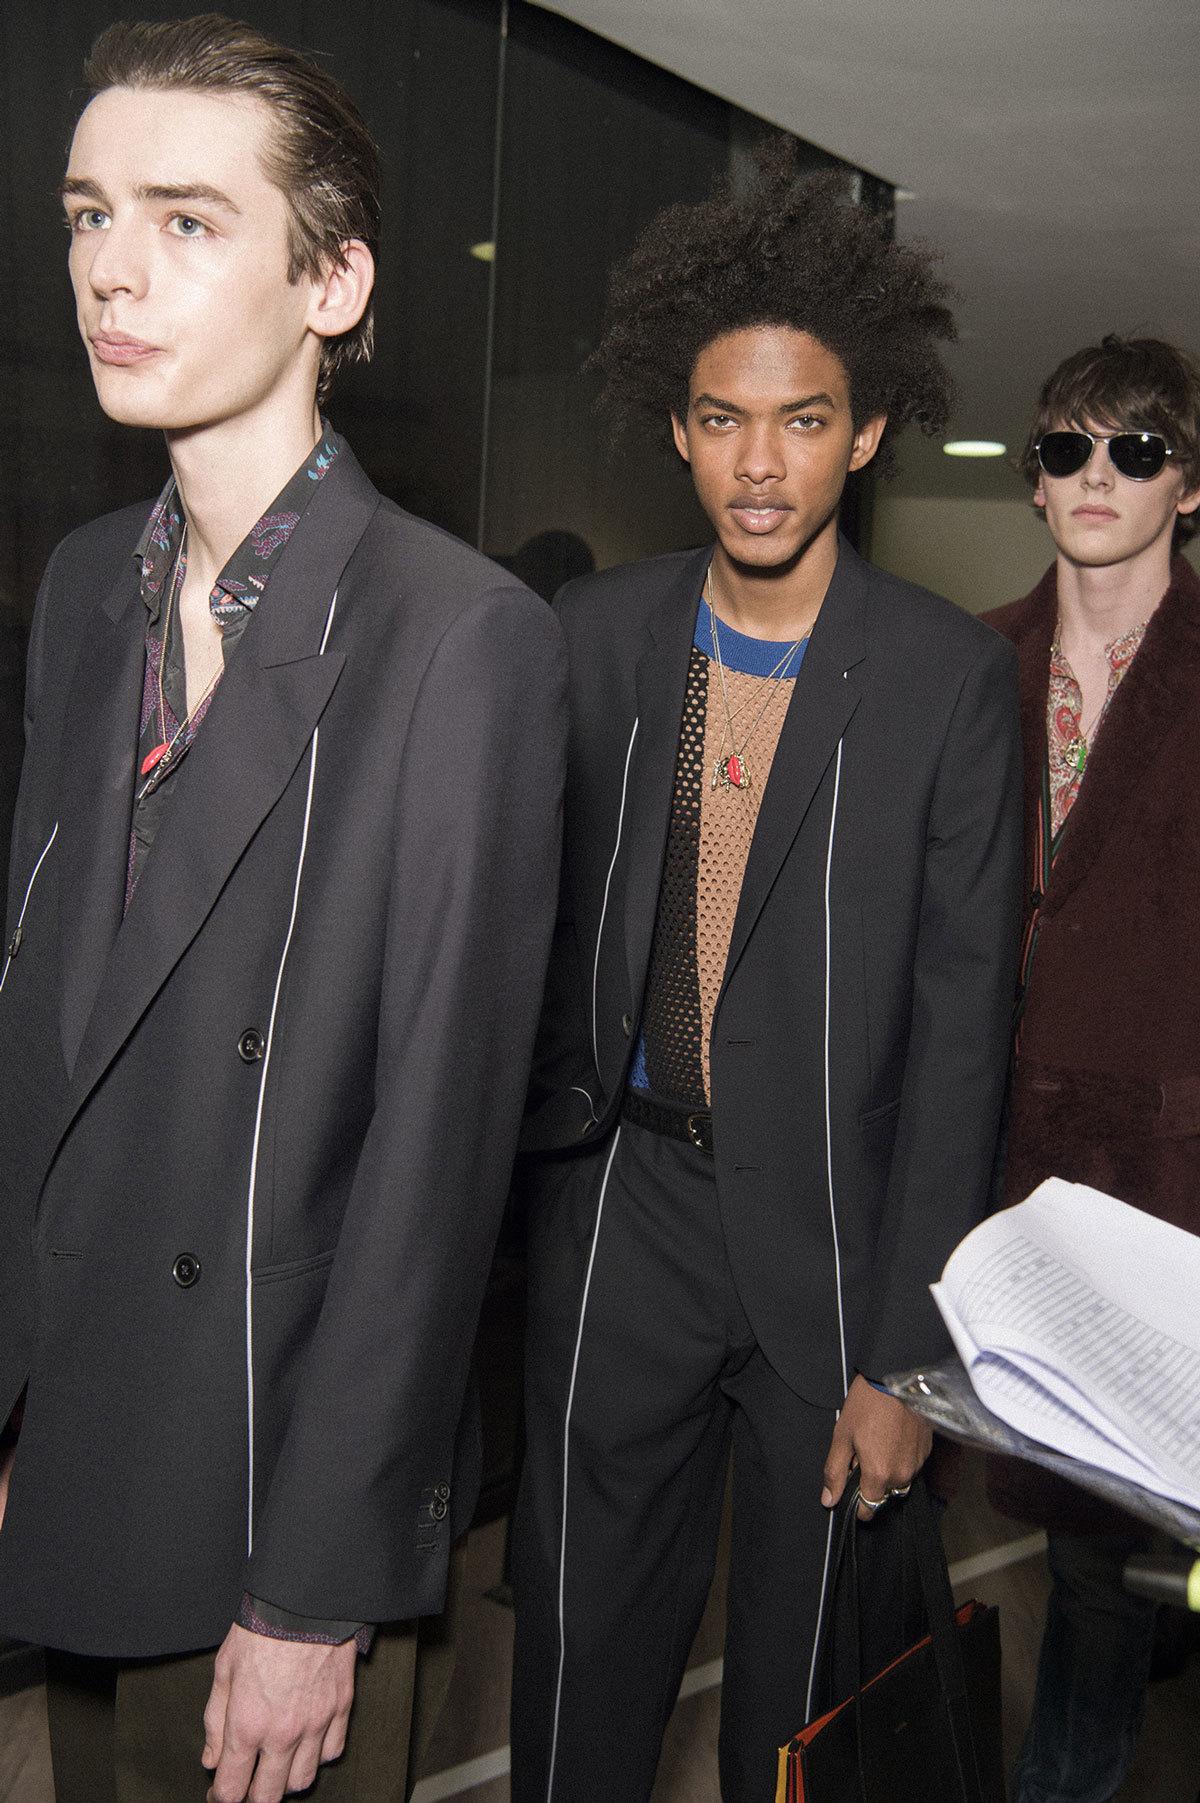 paul smith pays tribute to bowie with fall/winter 16 | look | i-D